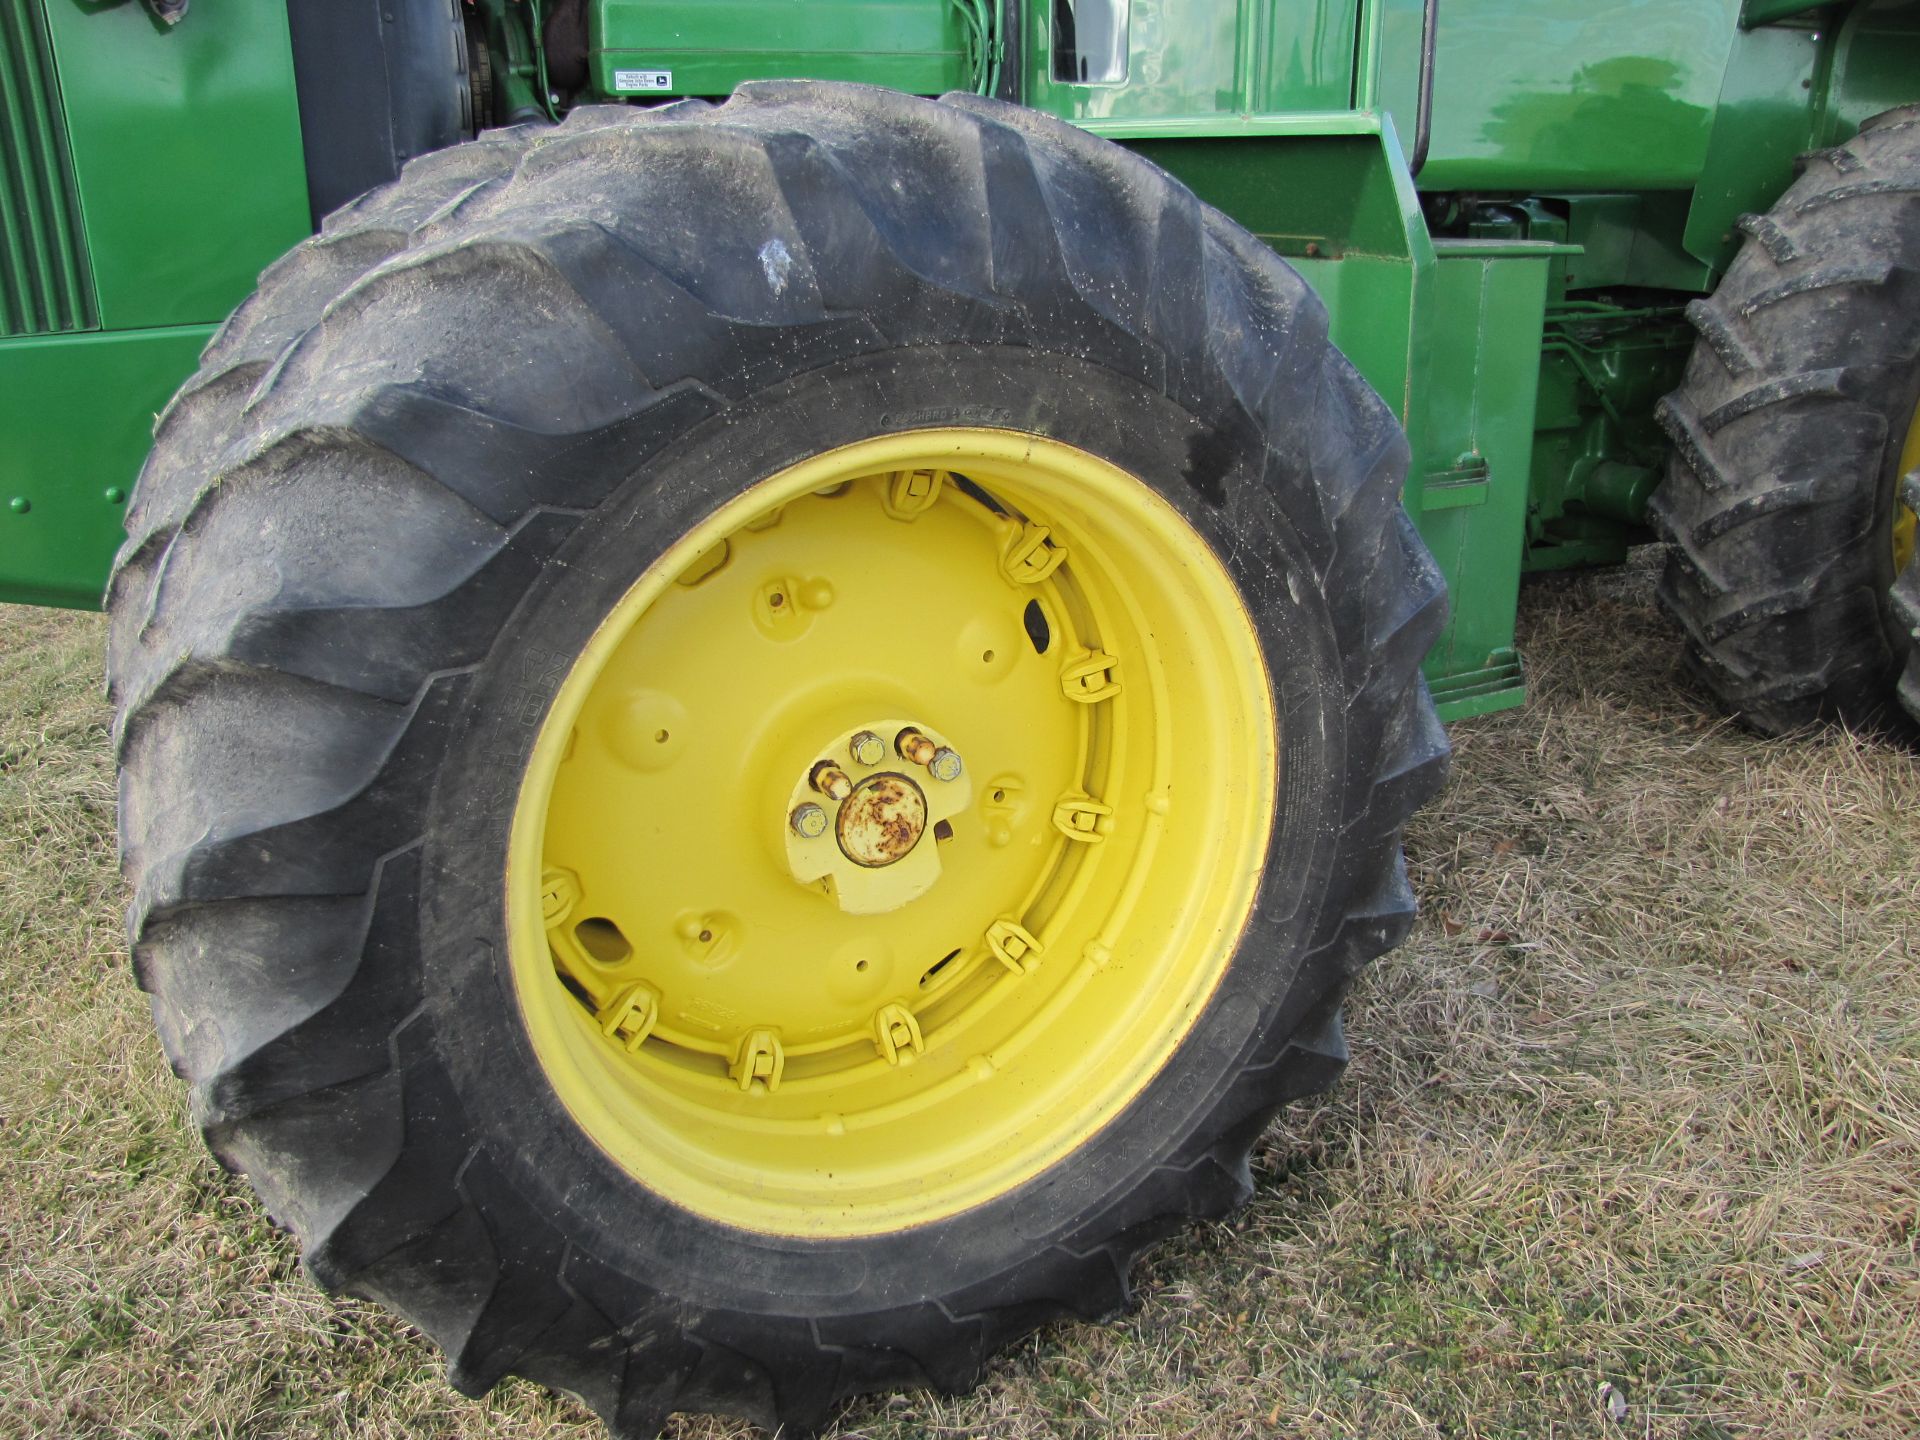 John Deere 8440 tractor, 4WD, C/H/A, 18.4-34 tires, 1000 PTO - Image 12 of 61